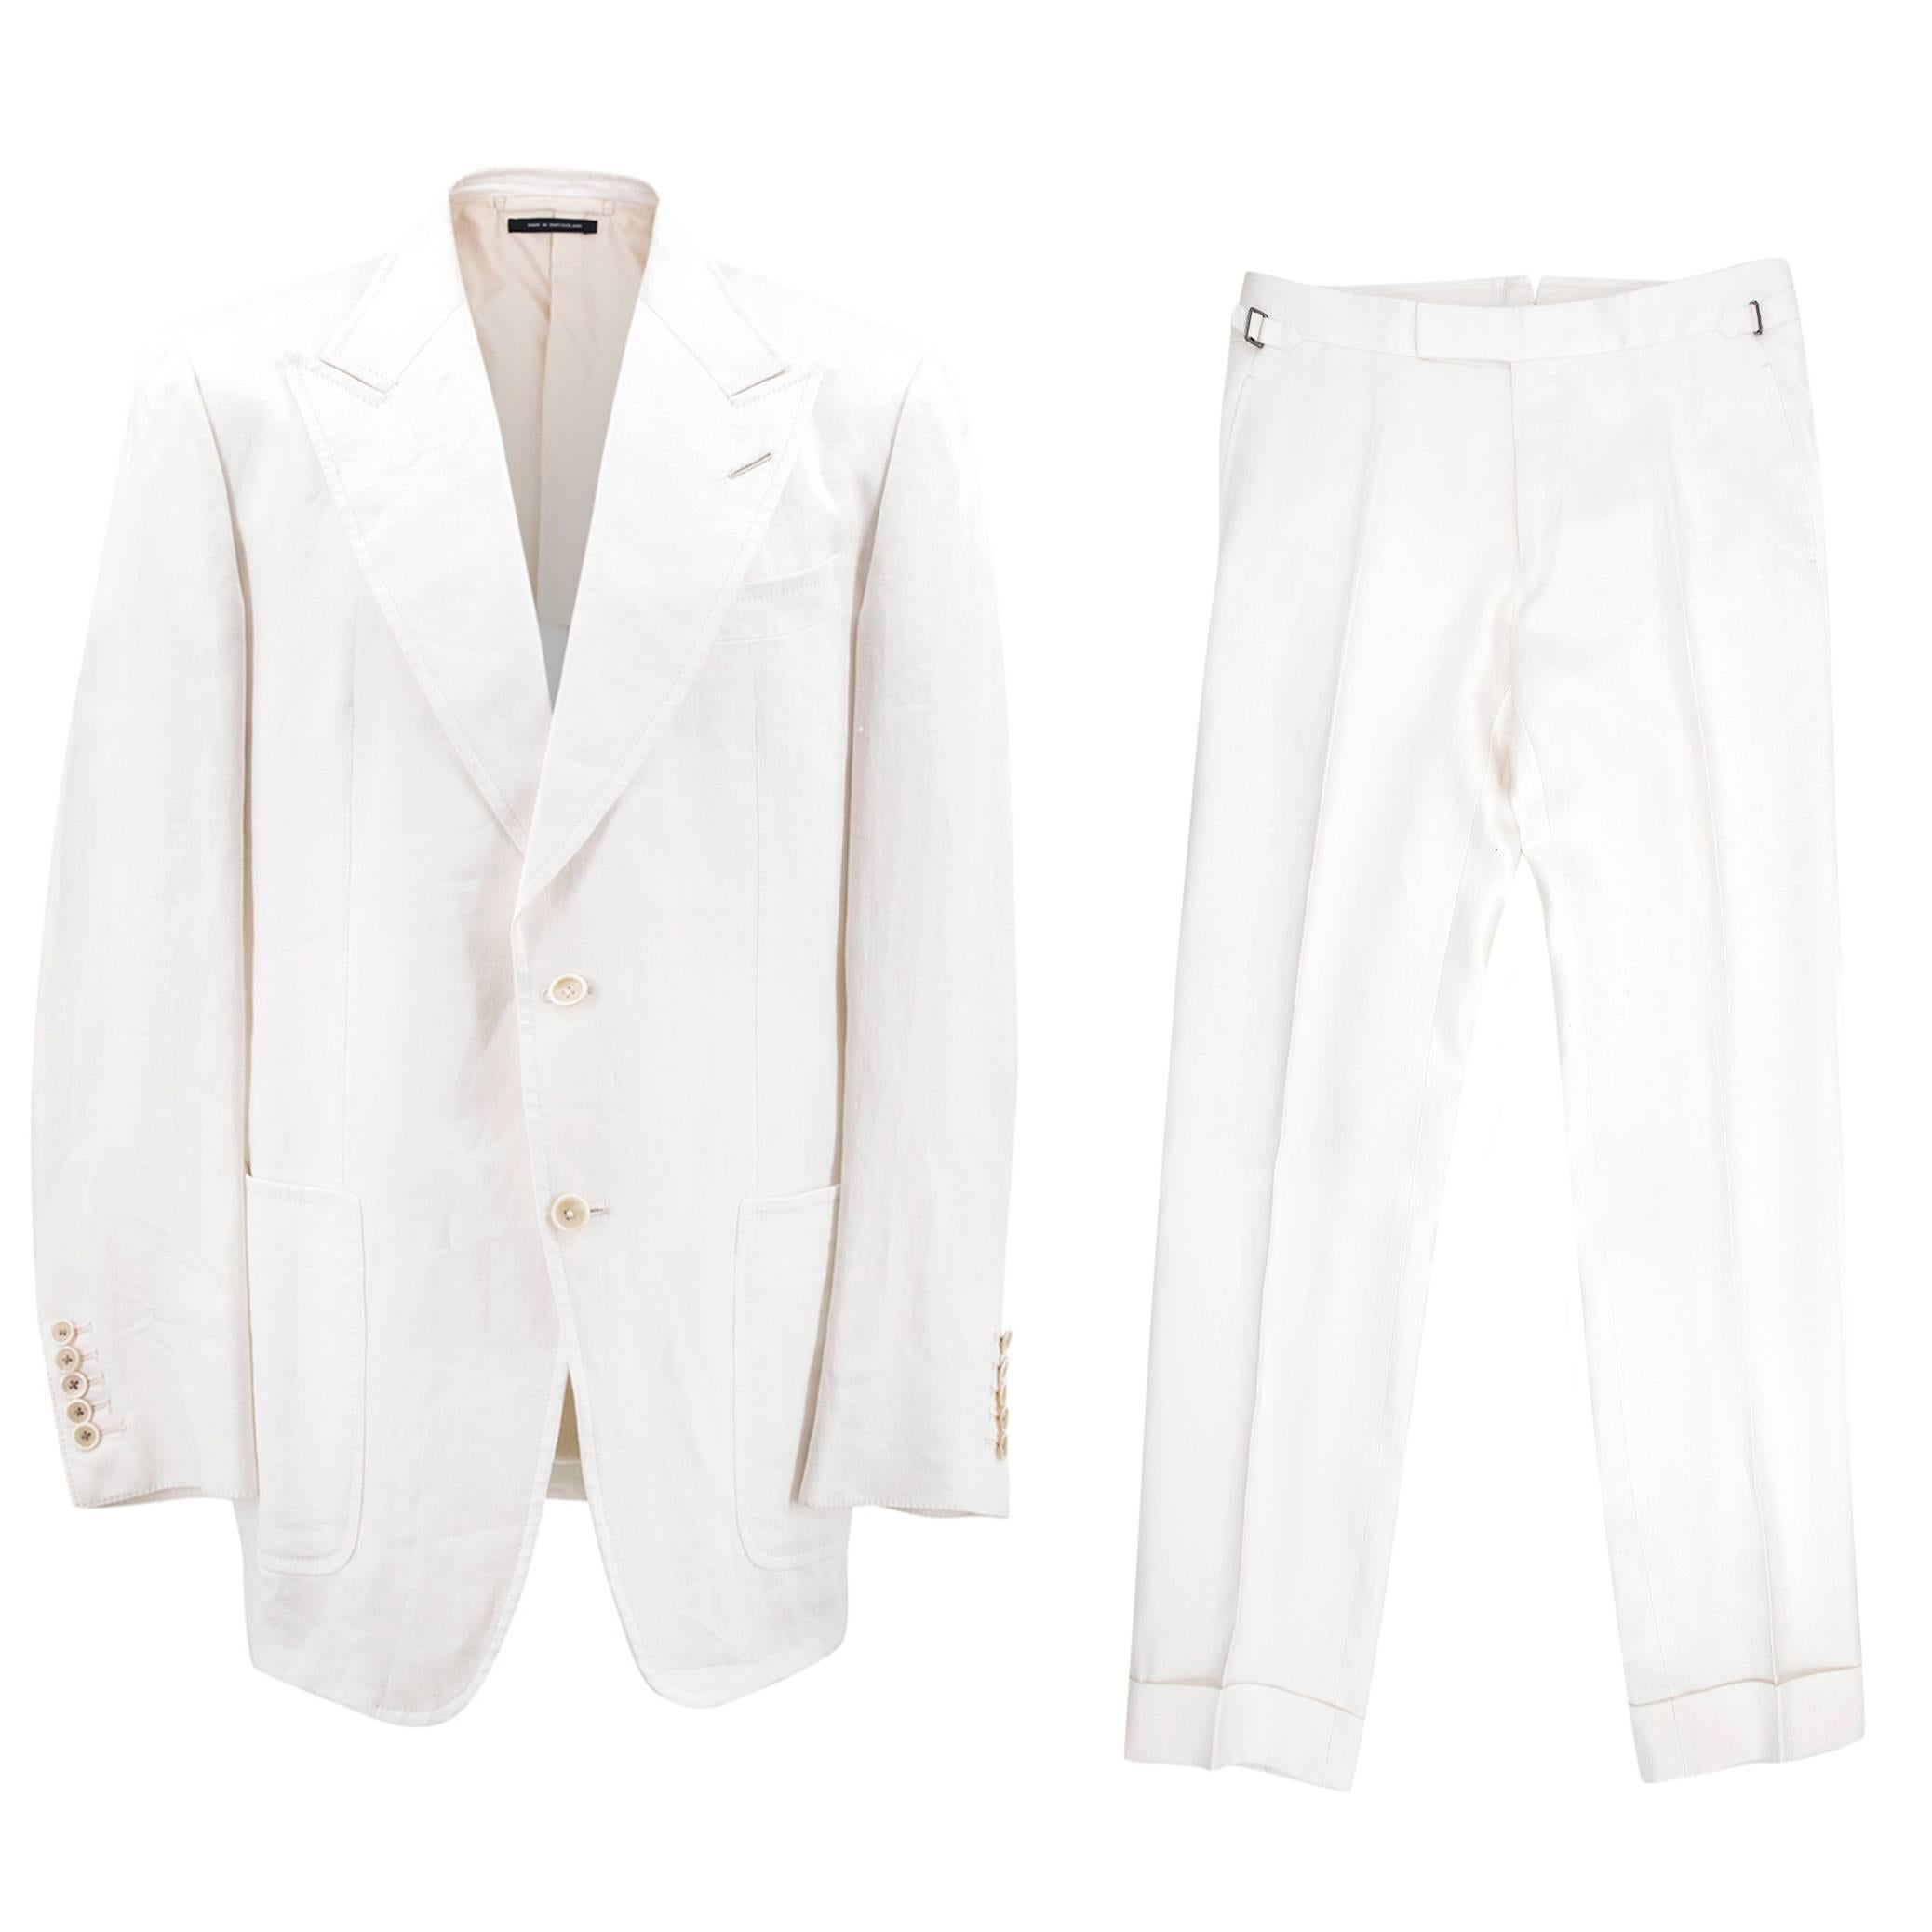 Tom Ford Cream Linen Suit For Sale